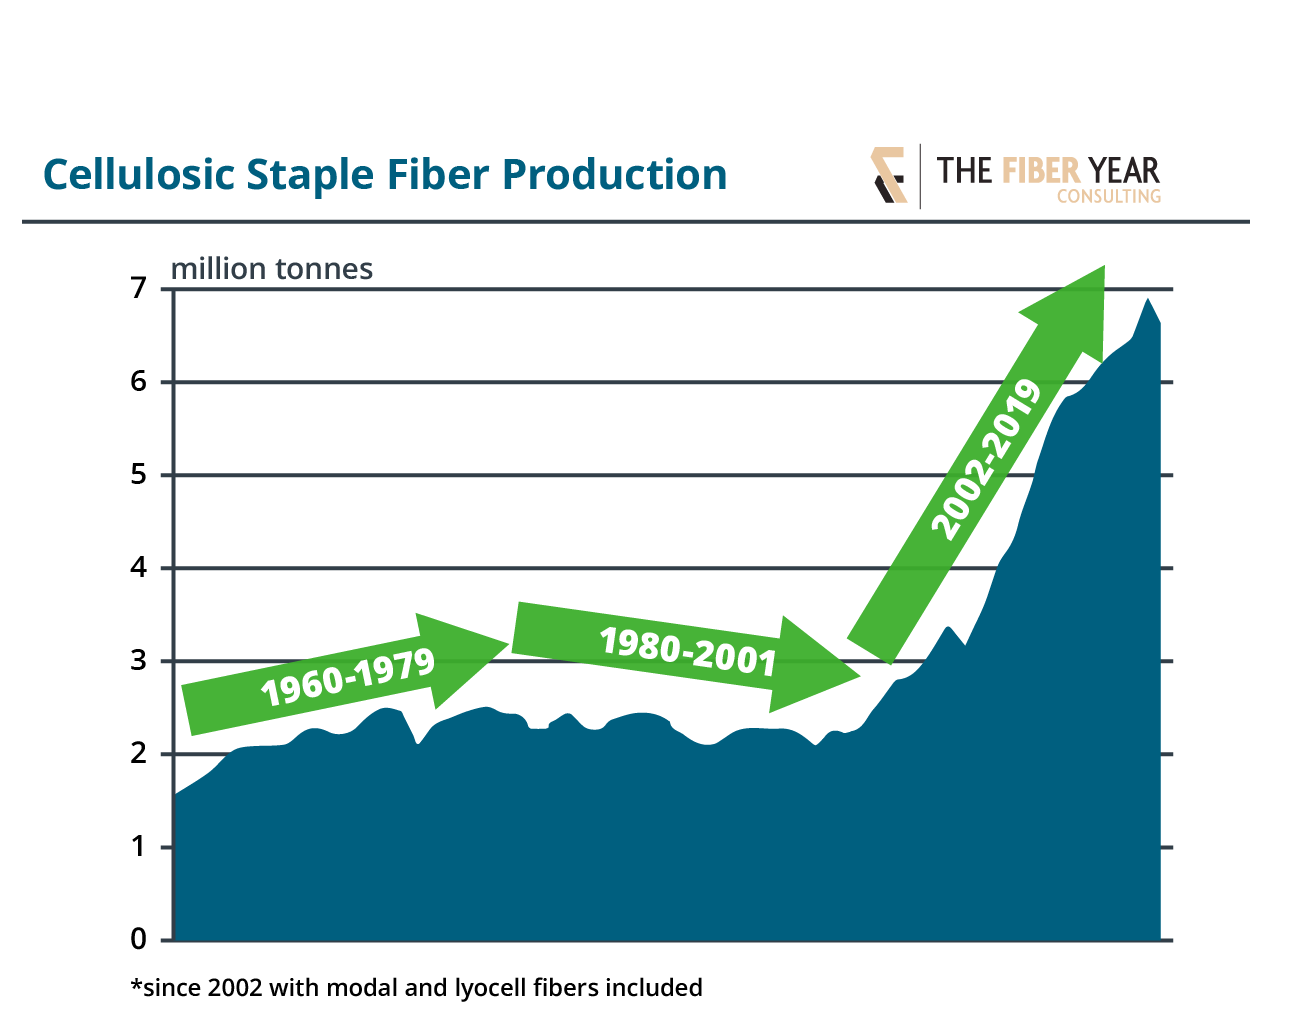 CELLULOSIC FIBERS - A WORLD OF OPPORTUNITY